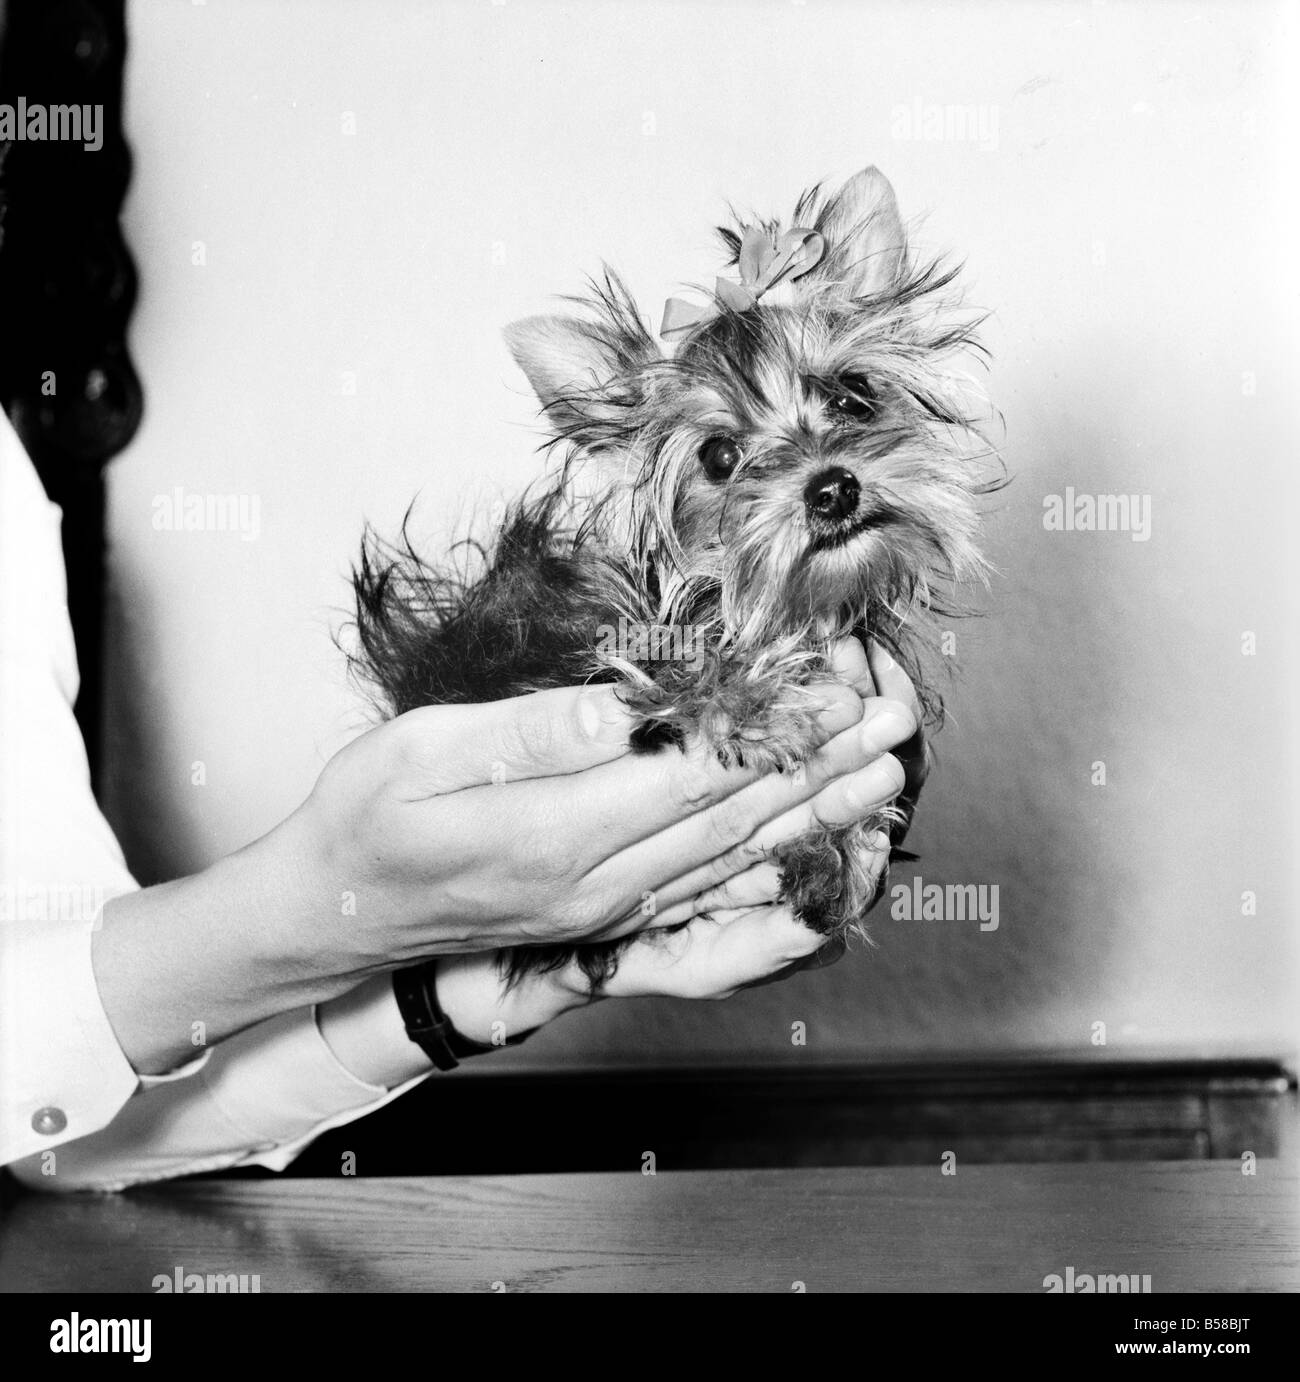 You have heard of lap dogs well Fifi here is smaller than the average Yorkshire Terrier weighing in at only 24 oz, and fits in the owners hand, could this be the start of a new trend? April 1977 77-02090-006 Stock Photo